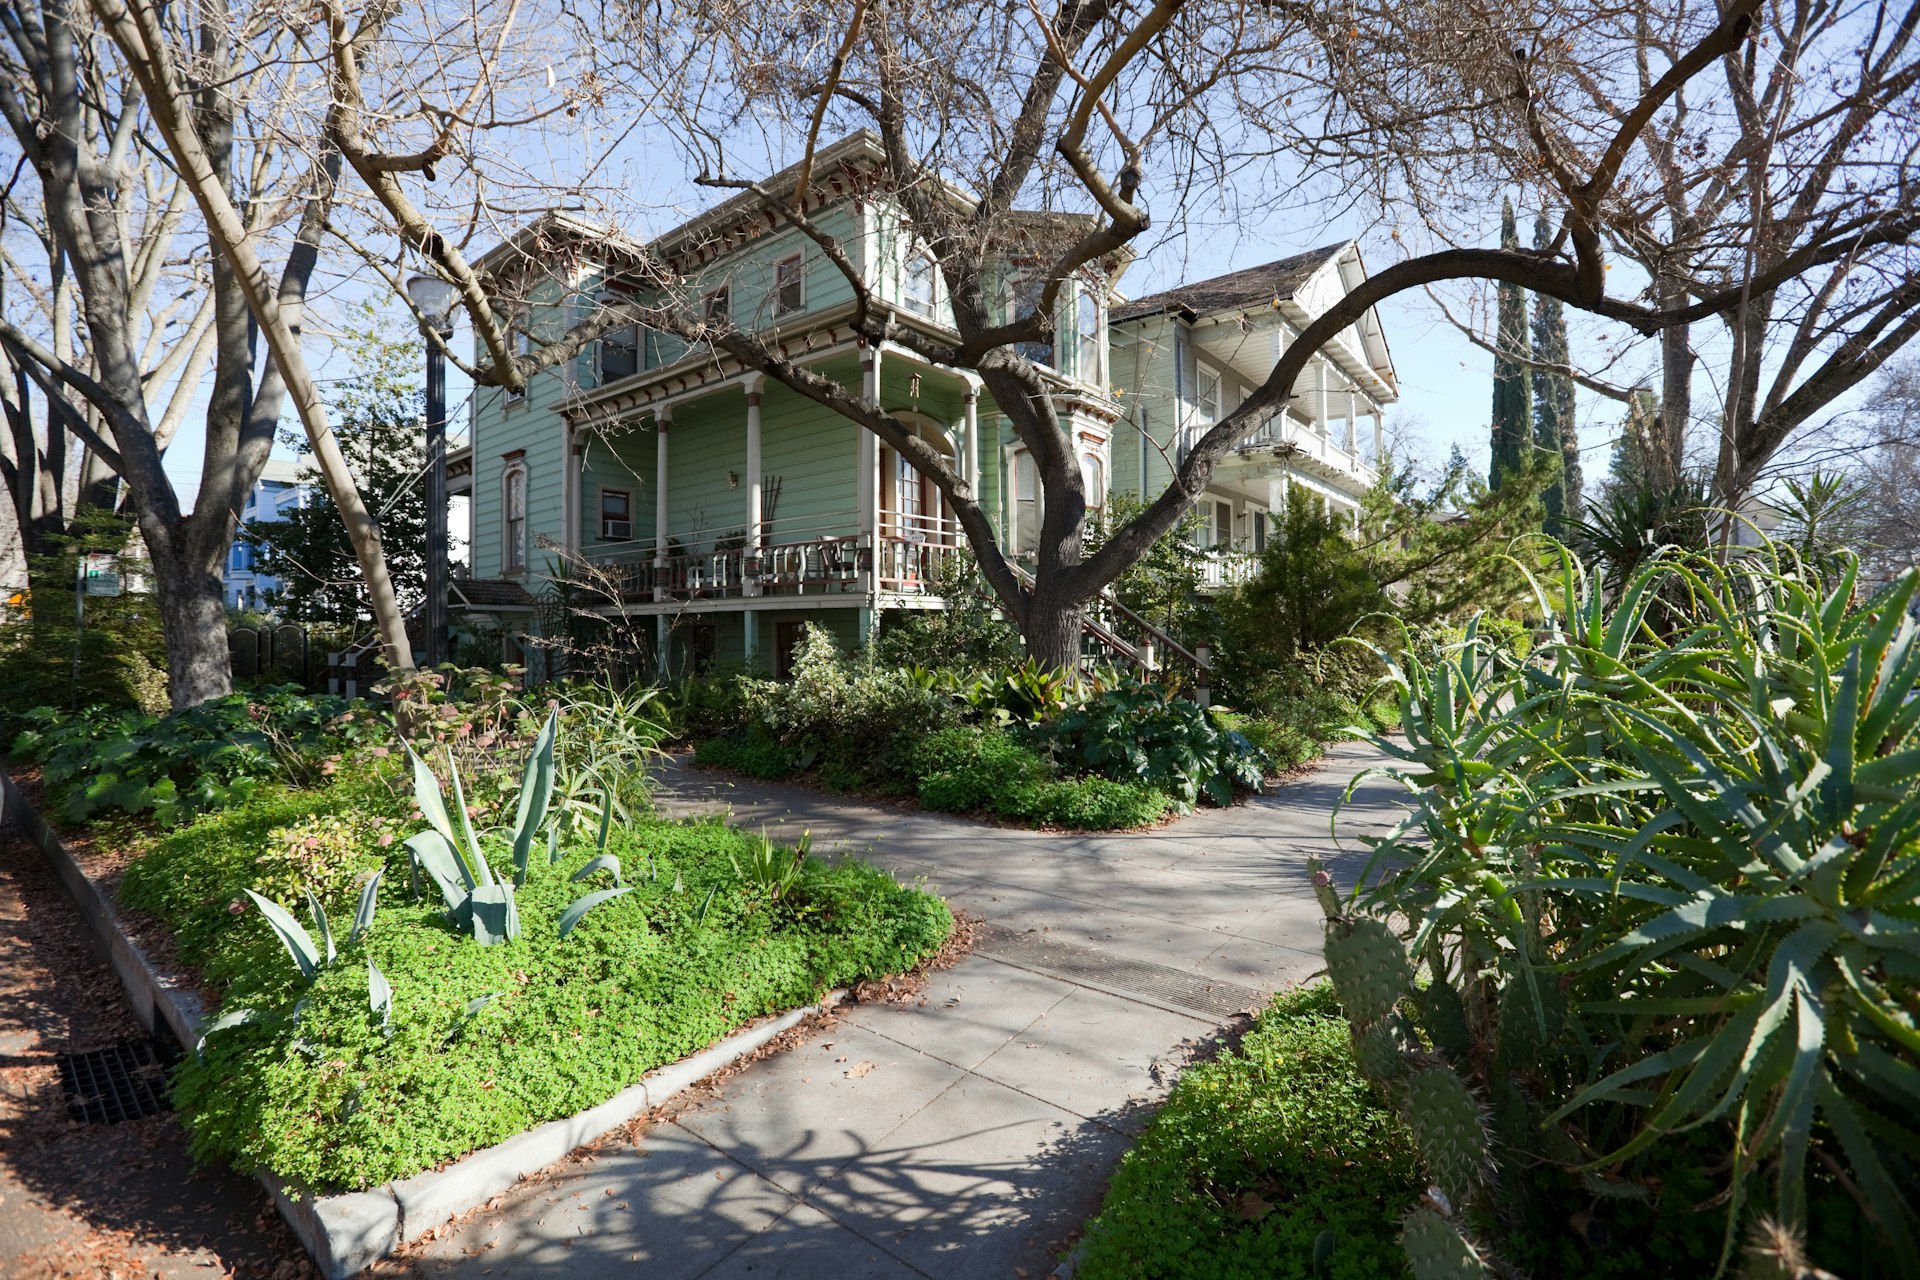 Wooded Victorian houses with porches, with trees and succulent plantings by the sidewalk on a street in Midtown, Sacramento, California, USA